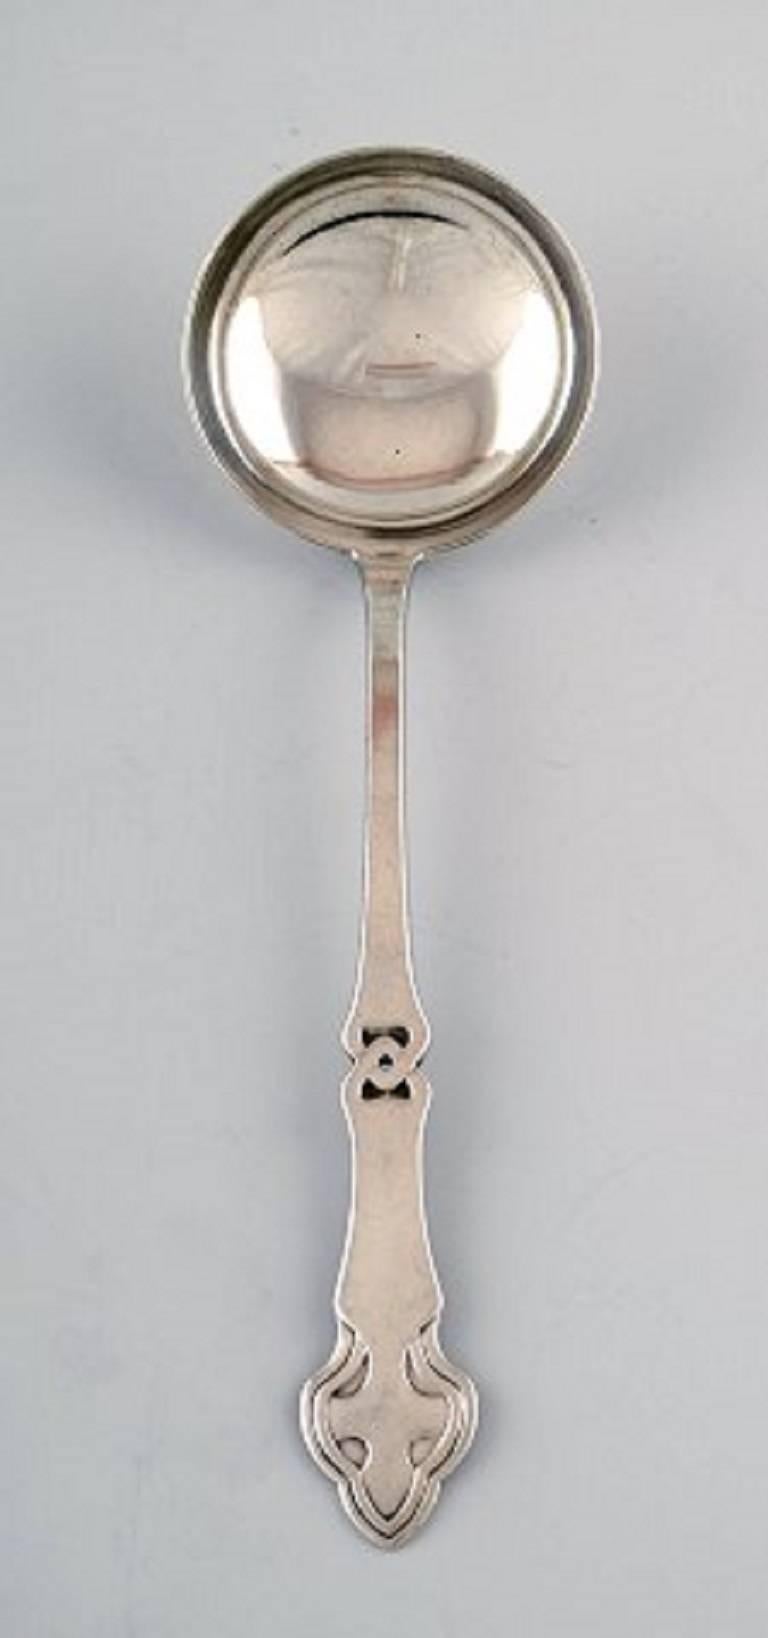 Danish Art Nouveau two serving spoons, silver. 1910s-1920s.
Guardein: CHF. Christian. Fr. Heise.
Measures: largest 22.5 cm.
In very good condition.